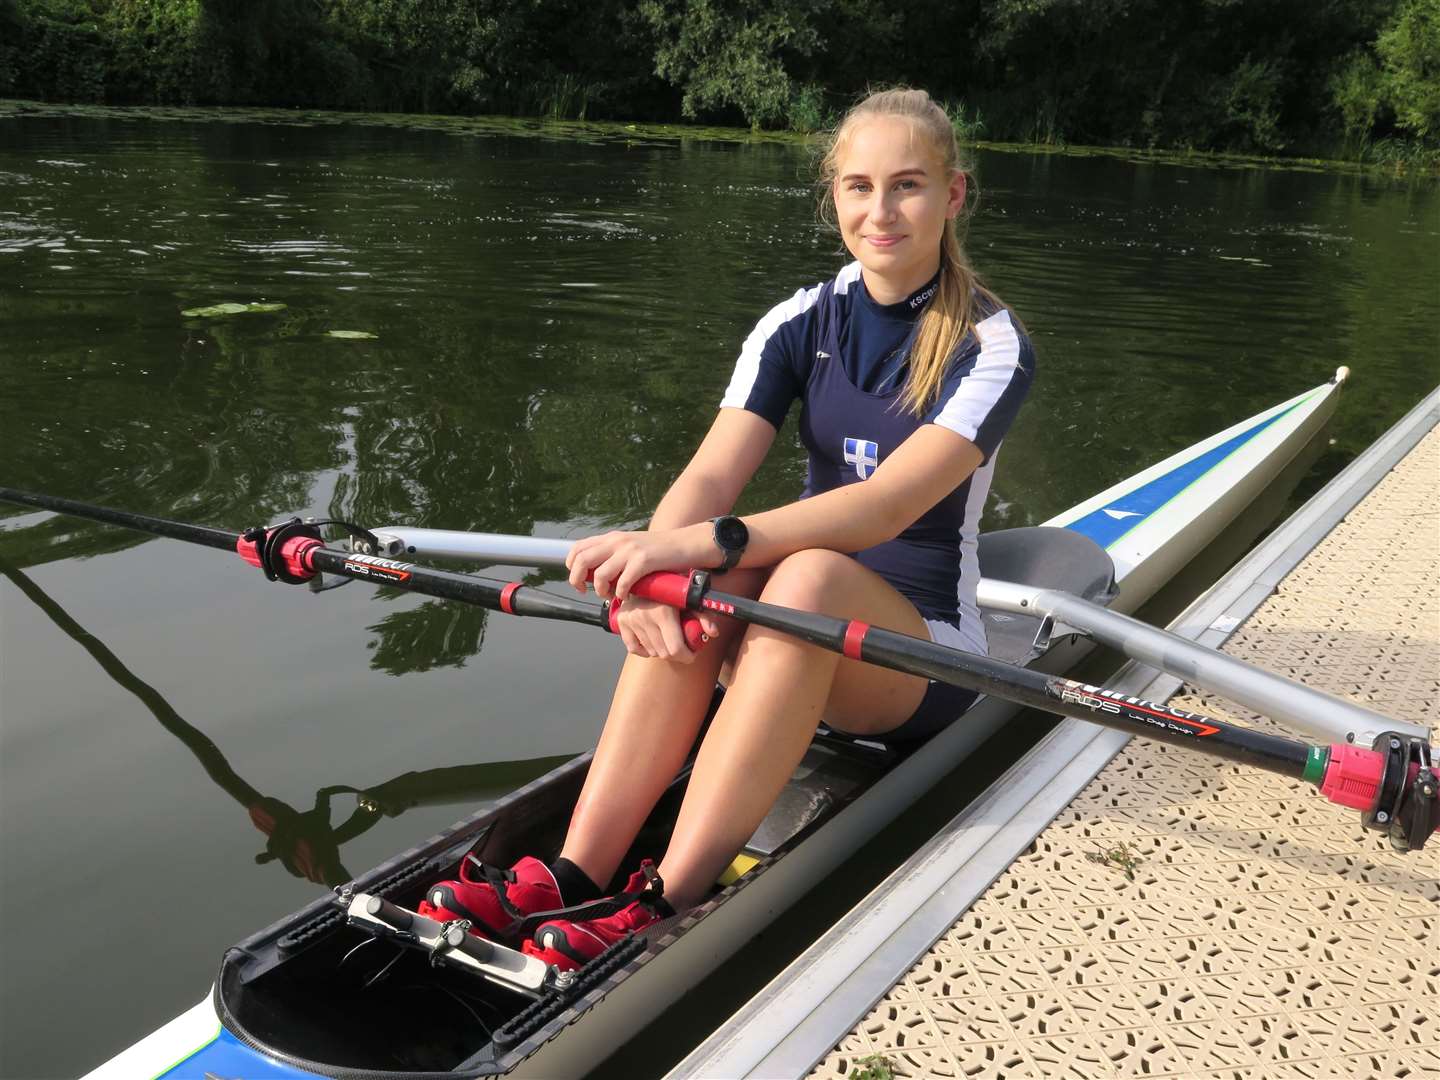 Tilly Abbott, 18, is rowing for Breast Cancer Care (15215133)